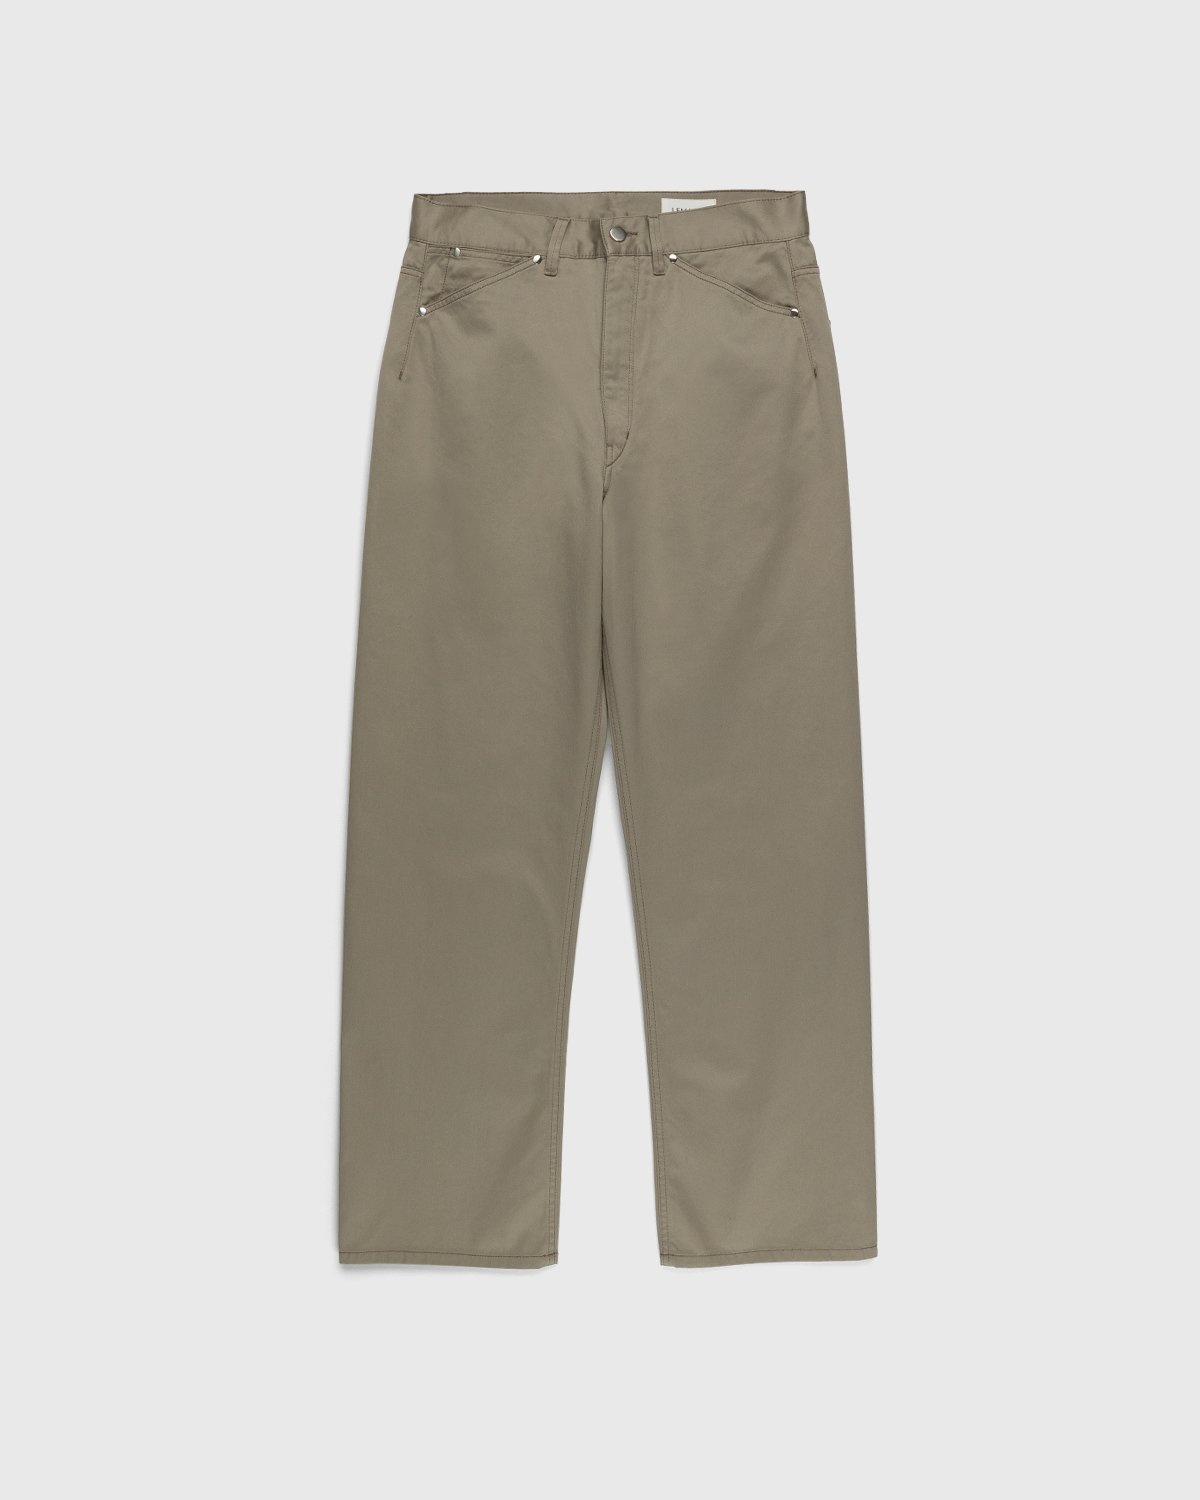 Lemaire – Seamless Pants Light Taupe - Trousers - Beige - Image 1